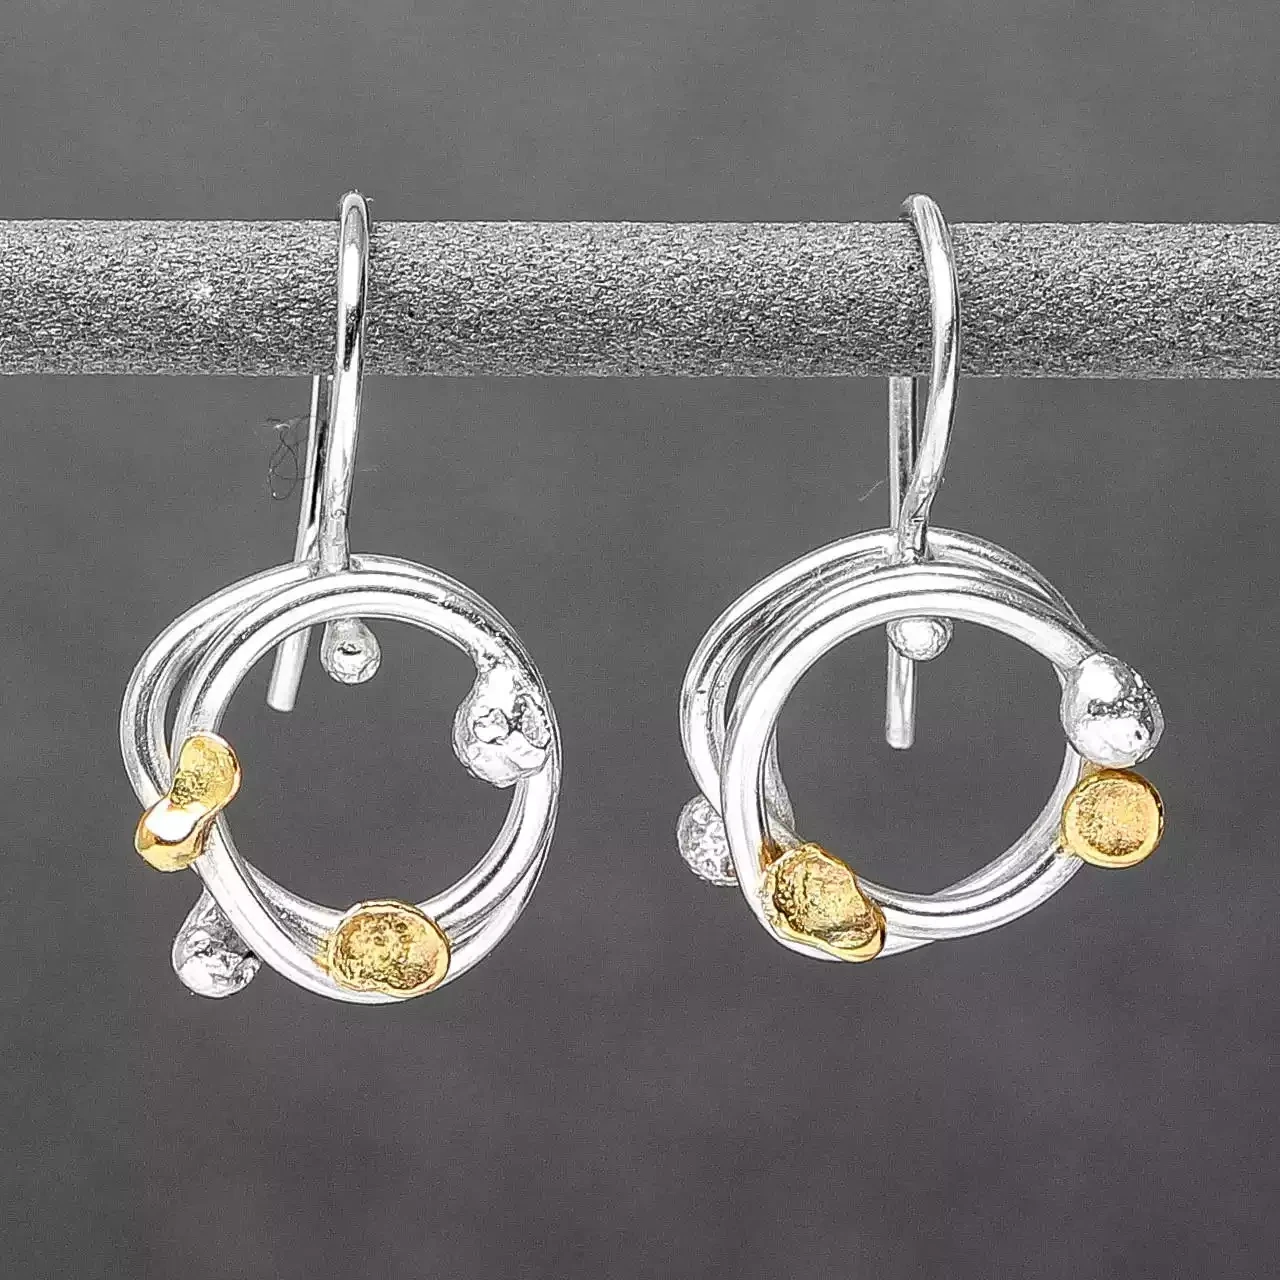 Twiggy Silver Drop Earrings with 9ct Gold Details by Fiona Mackay